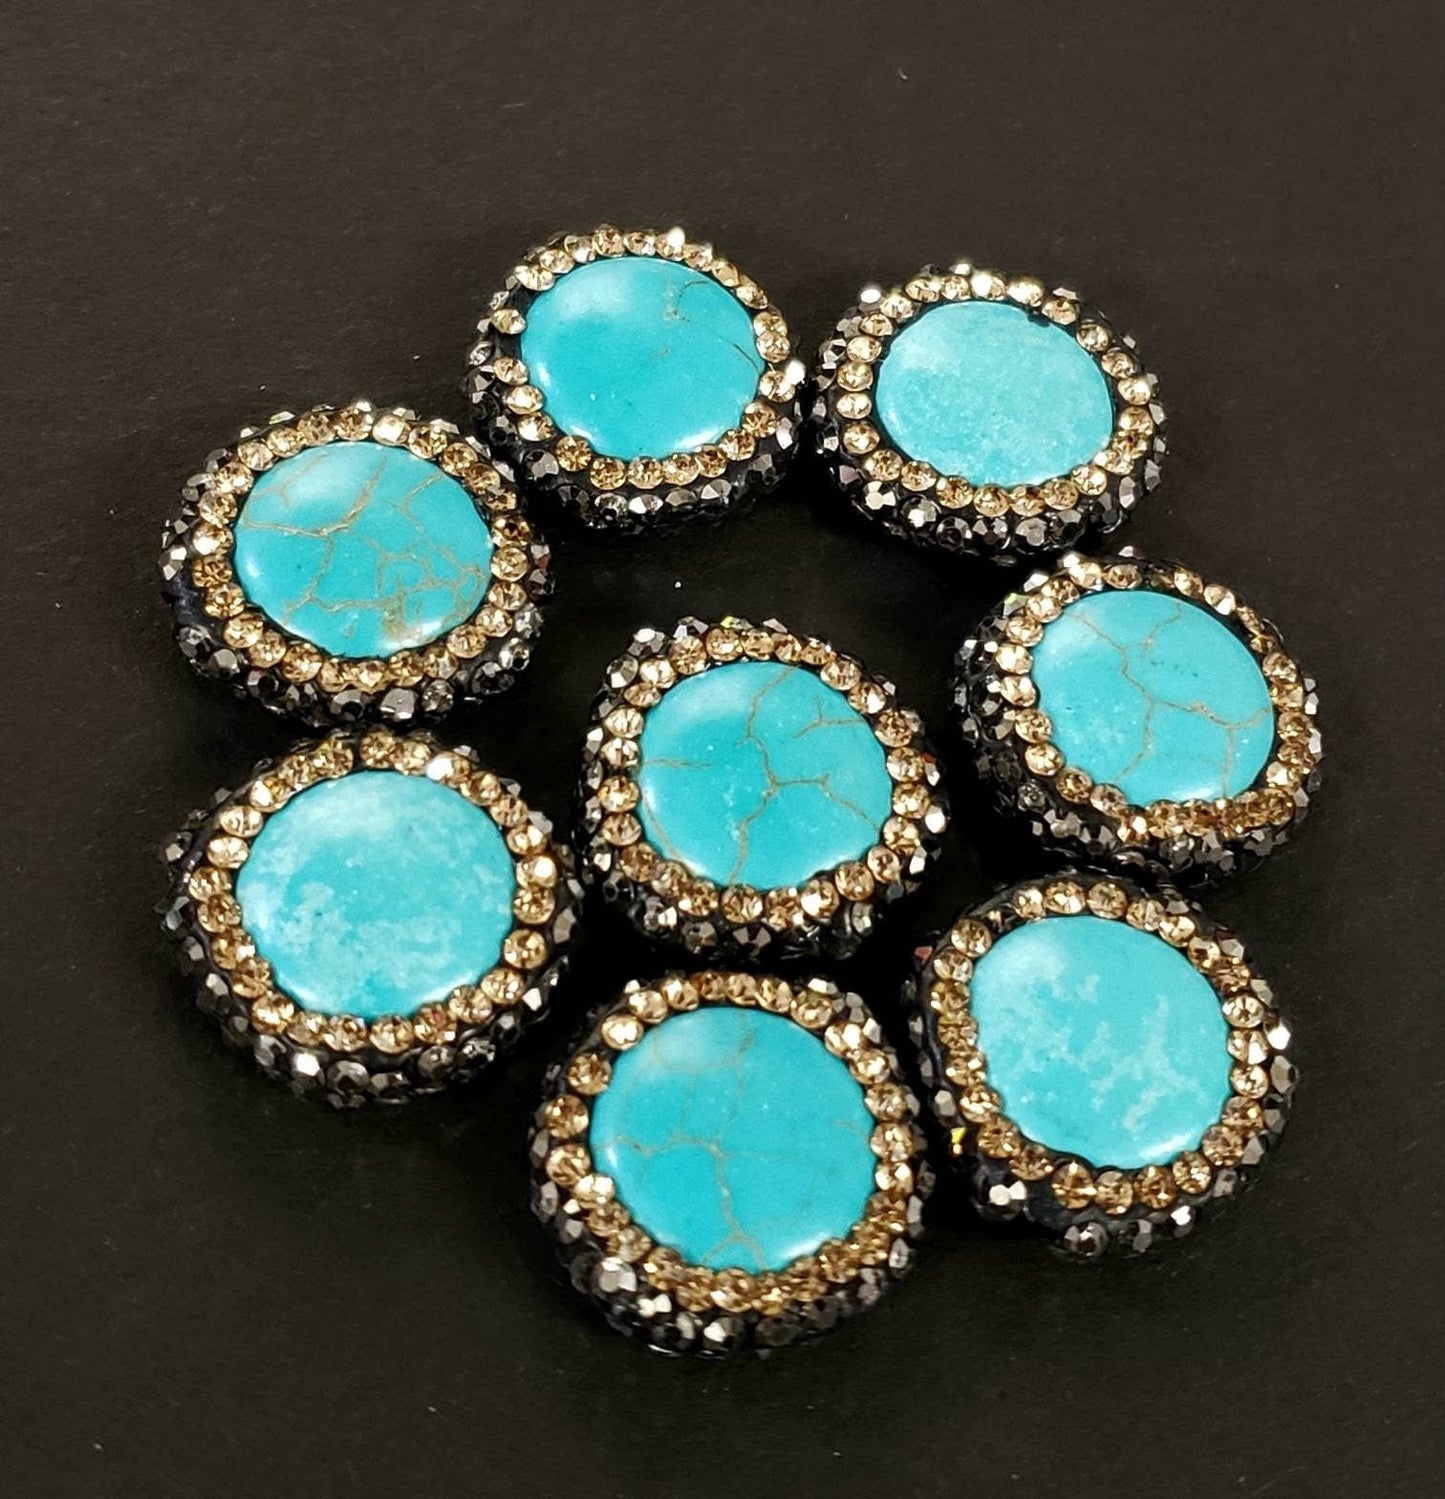 Turquoise rhinestone pave crystal black and gold line bead, center drilled , 17mm sparkly connector, spacer or focal bead.